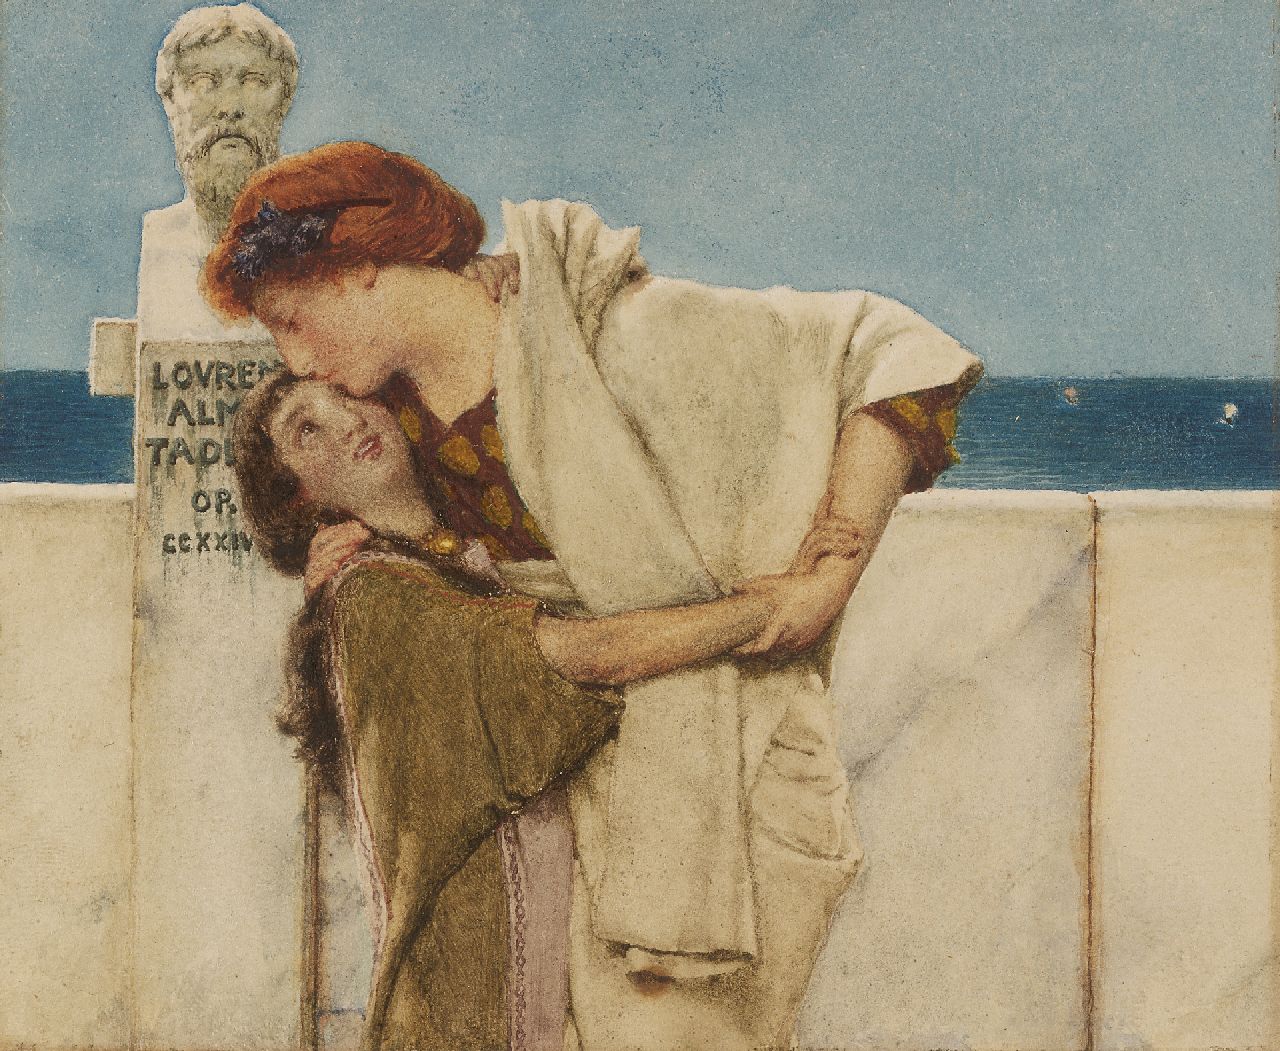 Lourens Alma Tadema | The kiss welcome, pen and ink and watercolour on paper, 10.7 x 13.1 cm, signed c.l. on the statue and painted 1881